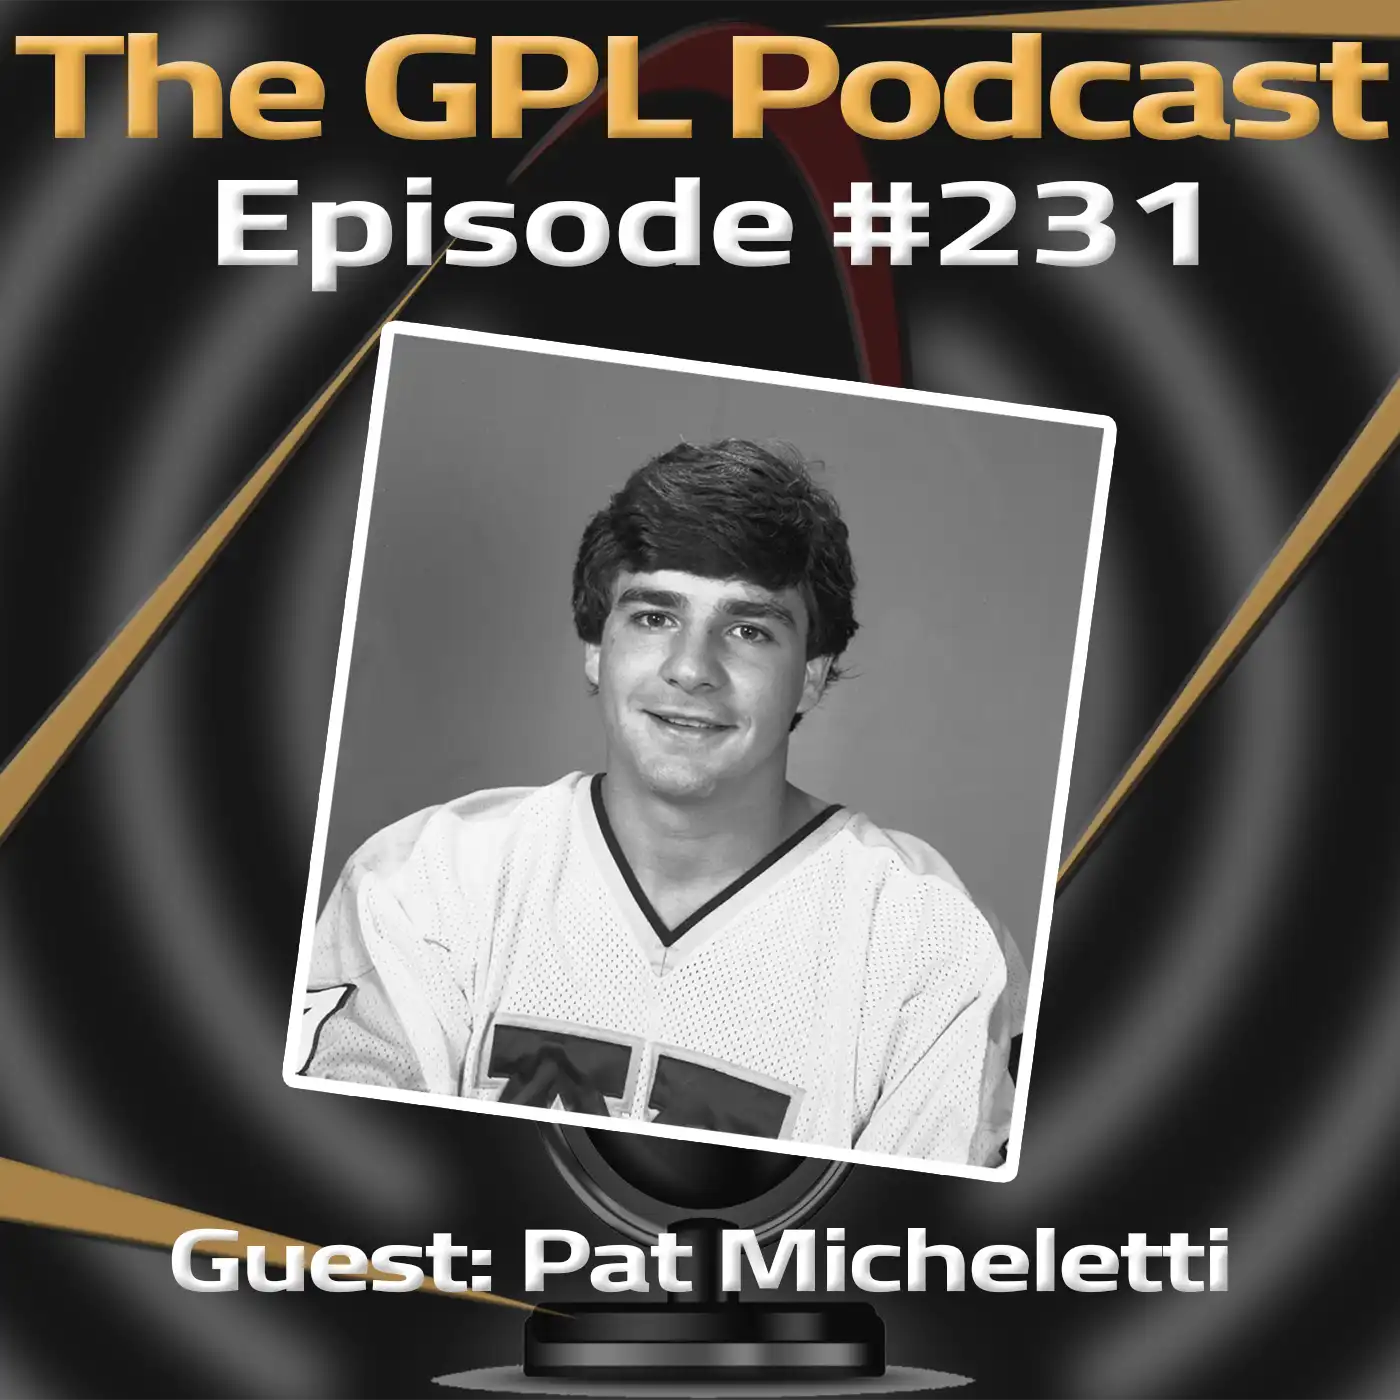 GPL Podcast #231: Pat Micheletti joined the show